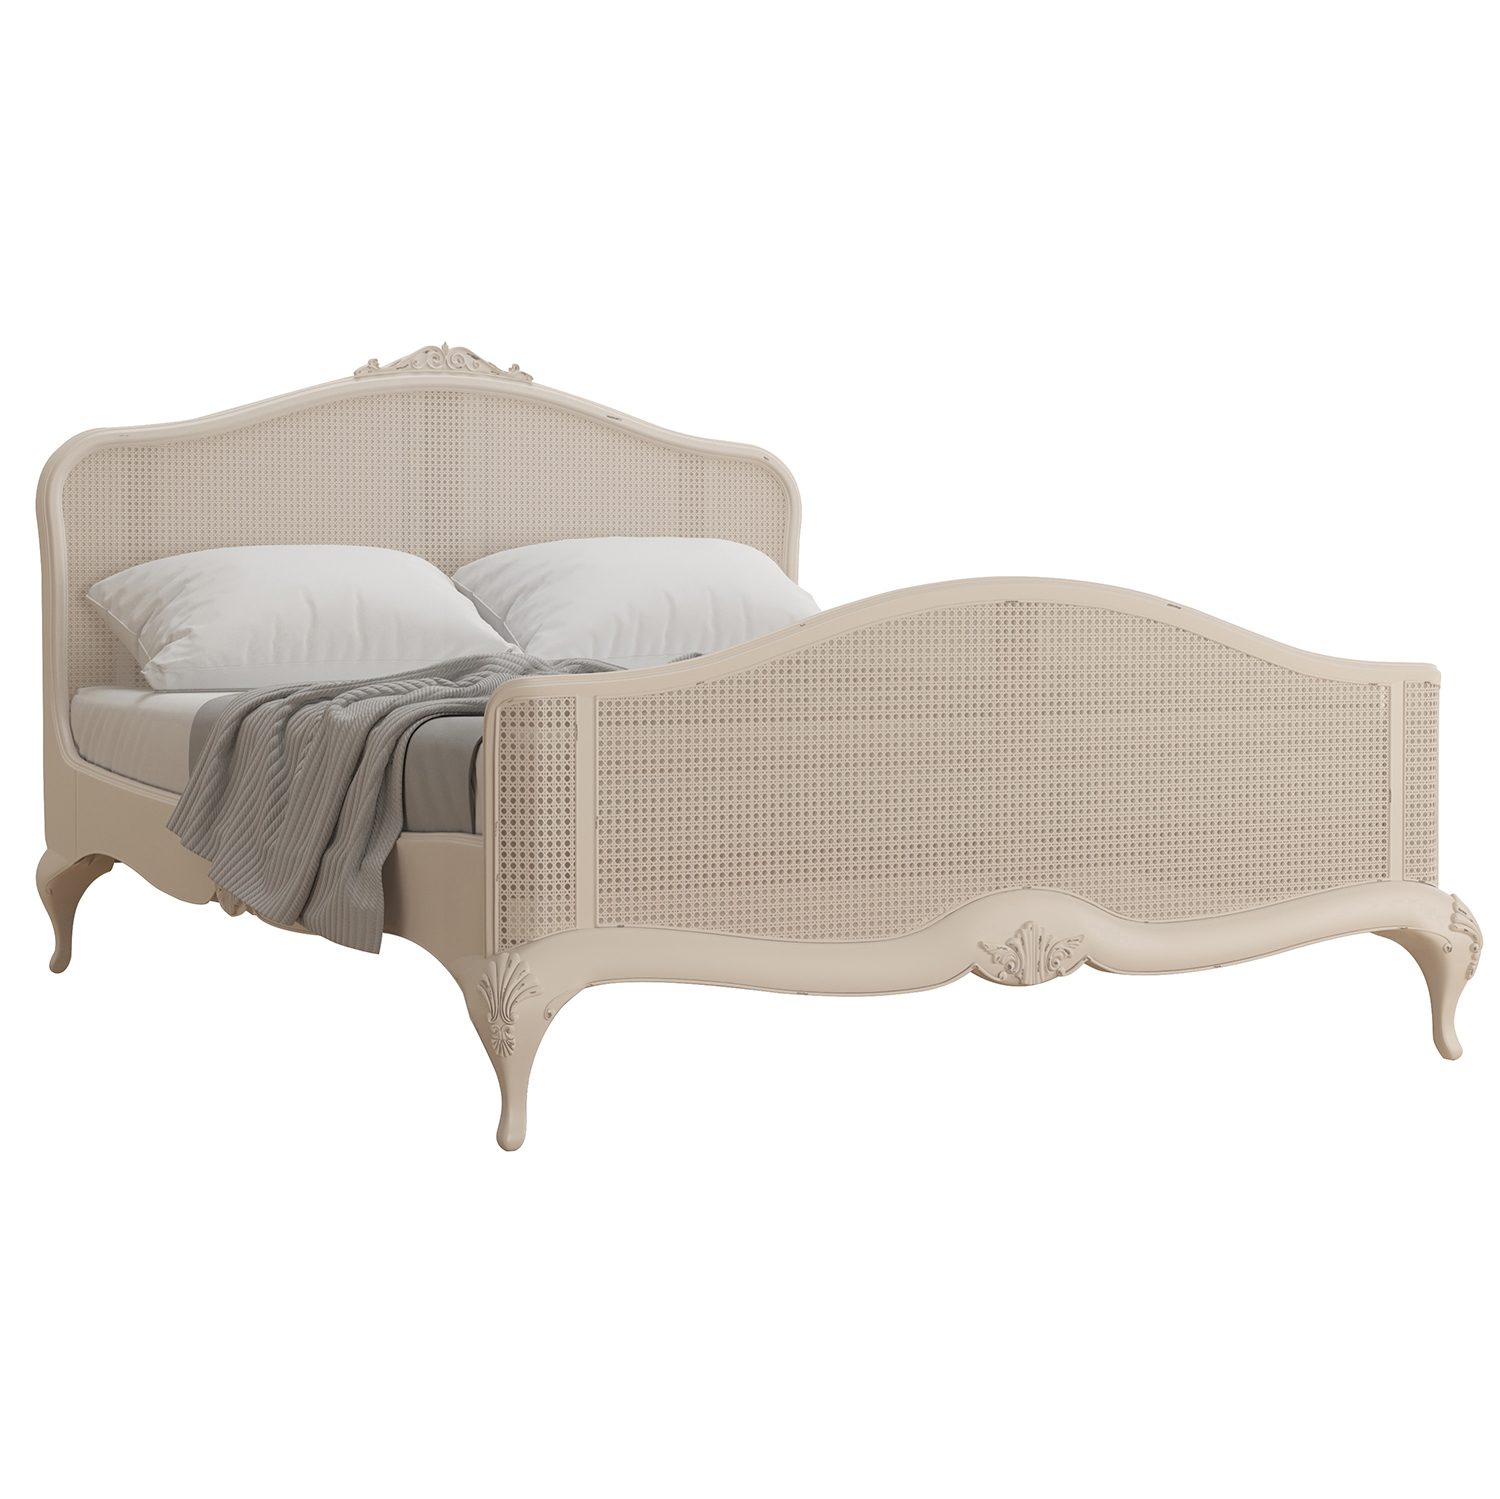 Willis & Gambier Ivory 5ft King Size Bedstead (150cm)